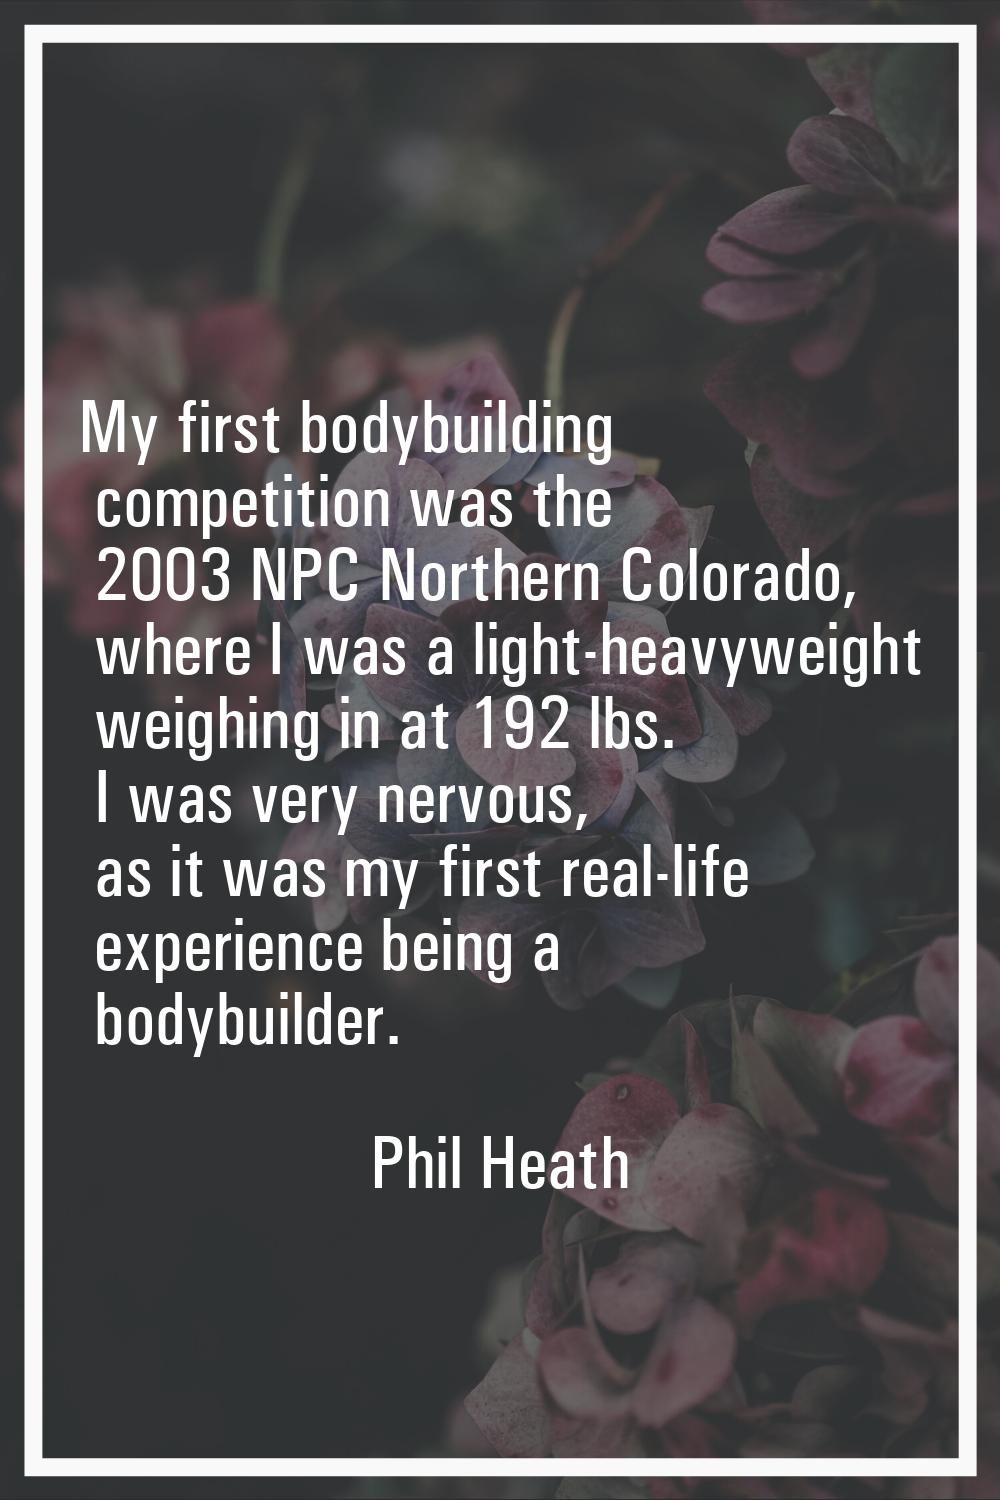 My first bodybuilding competition was the 2003 NPC Northern Colorado, where I was a light-heavyweig